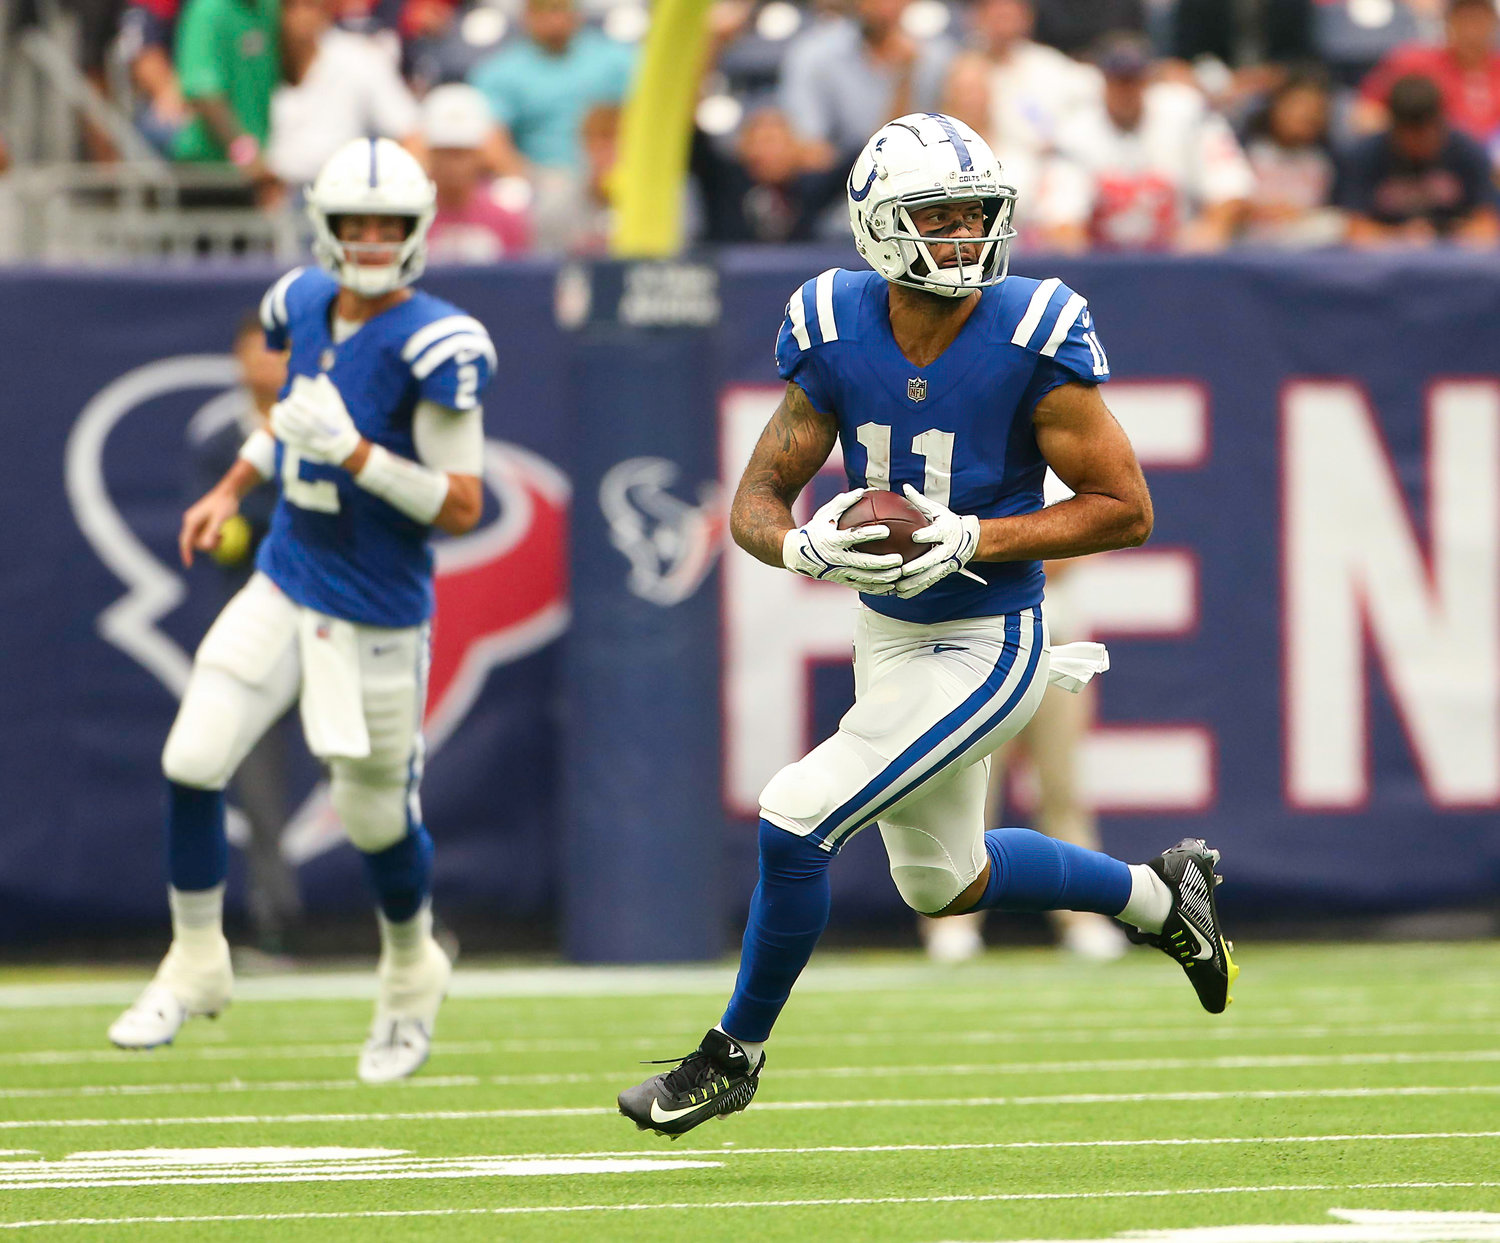 Indianapolis Colts wide receiver Michael Pittman Jr. (11) carries the ball after a catch as quarterback Matt Ryan (2) looks on during an NFL game between the Texans and the Colts on September 11, 2022 in Houston. The game ended in a 20-20 tie after a scoreless overtime period.